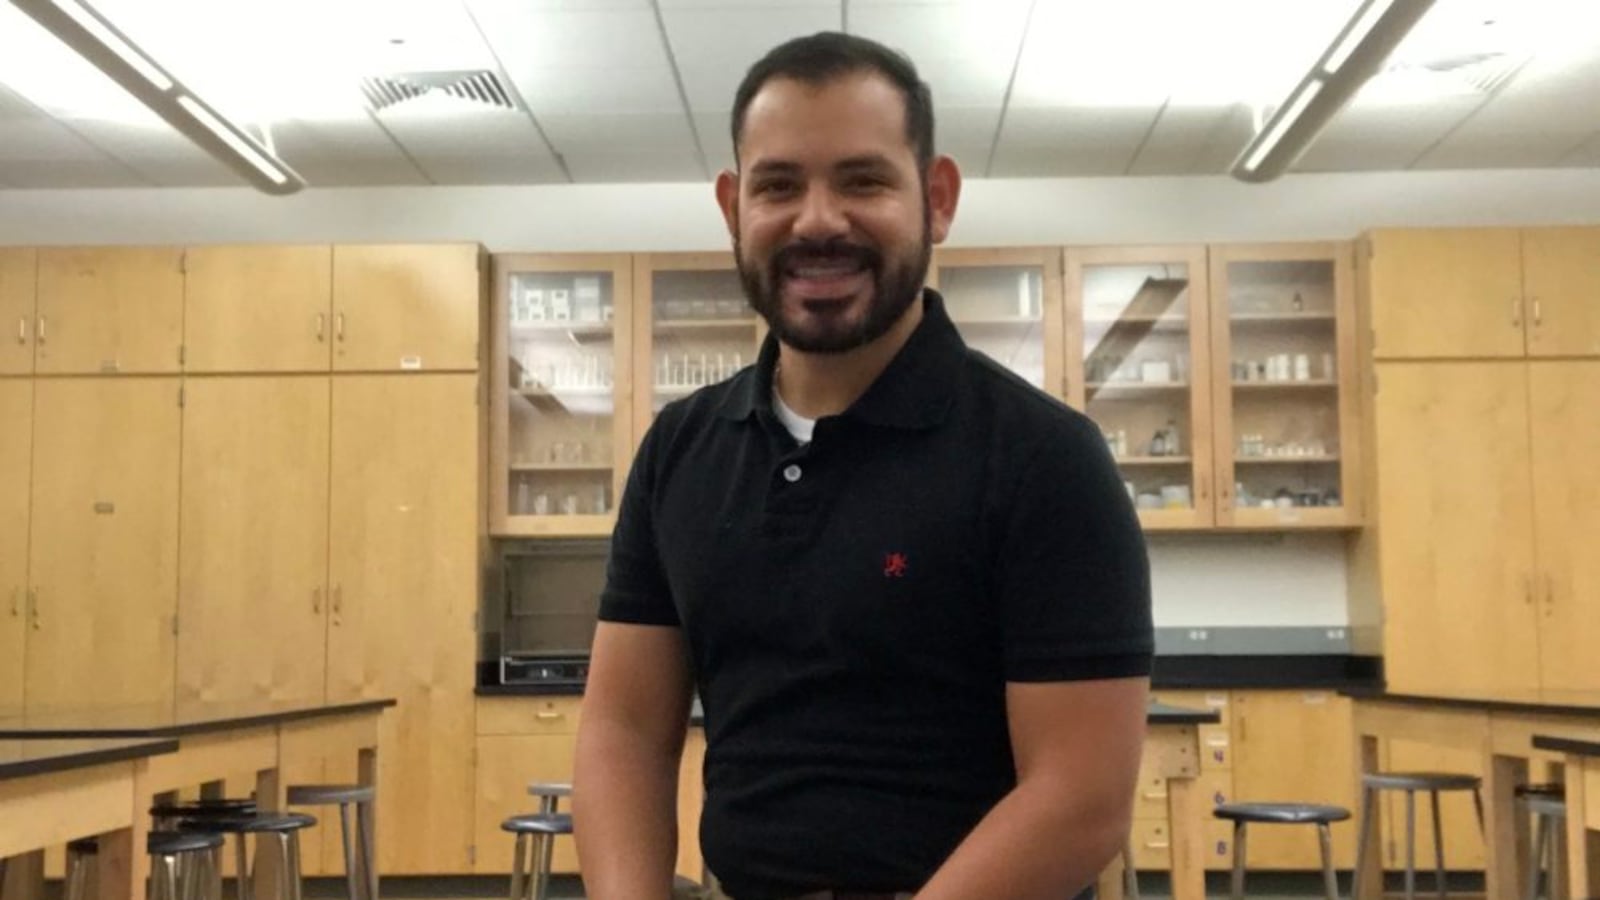 Jose Espinoza is a Chicago teacher with DACA status who provides support to students impacted by American immigration policy.